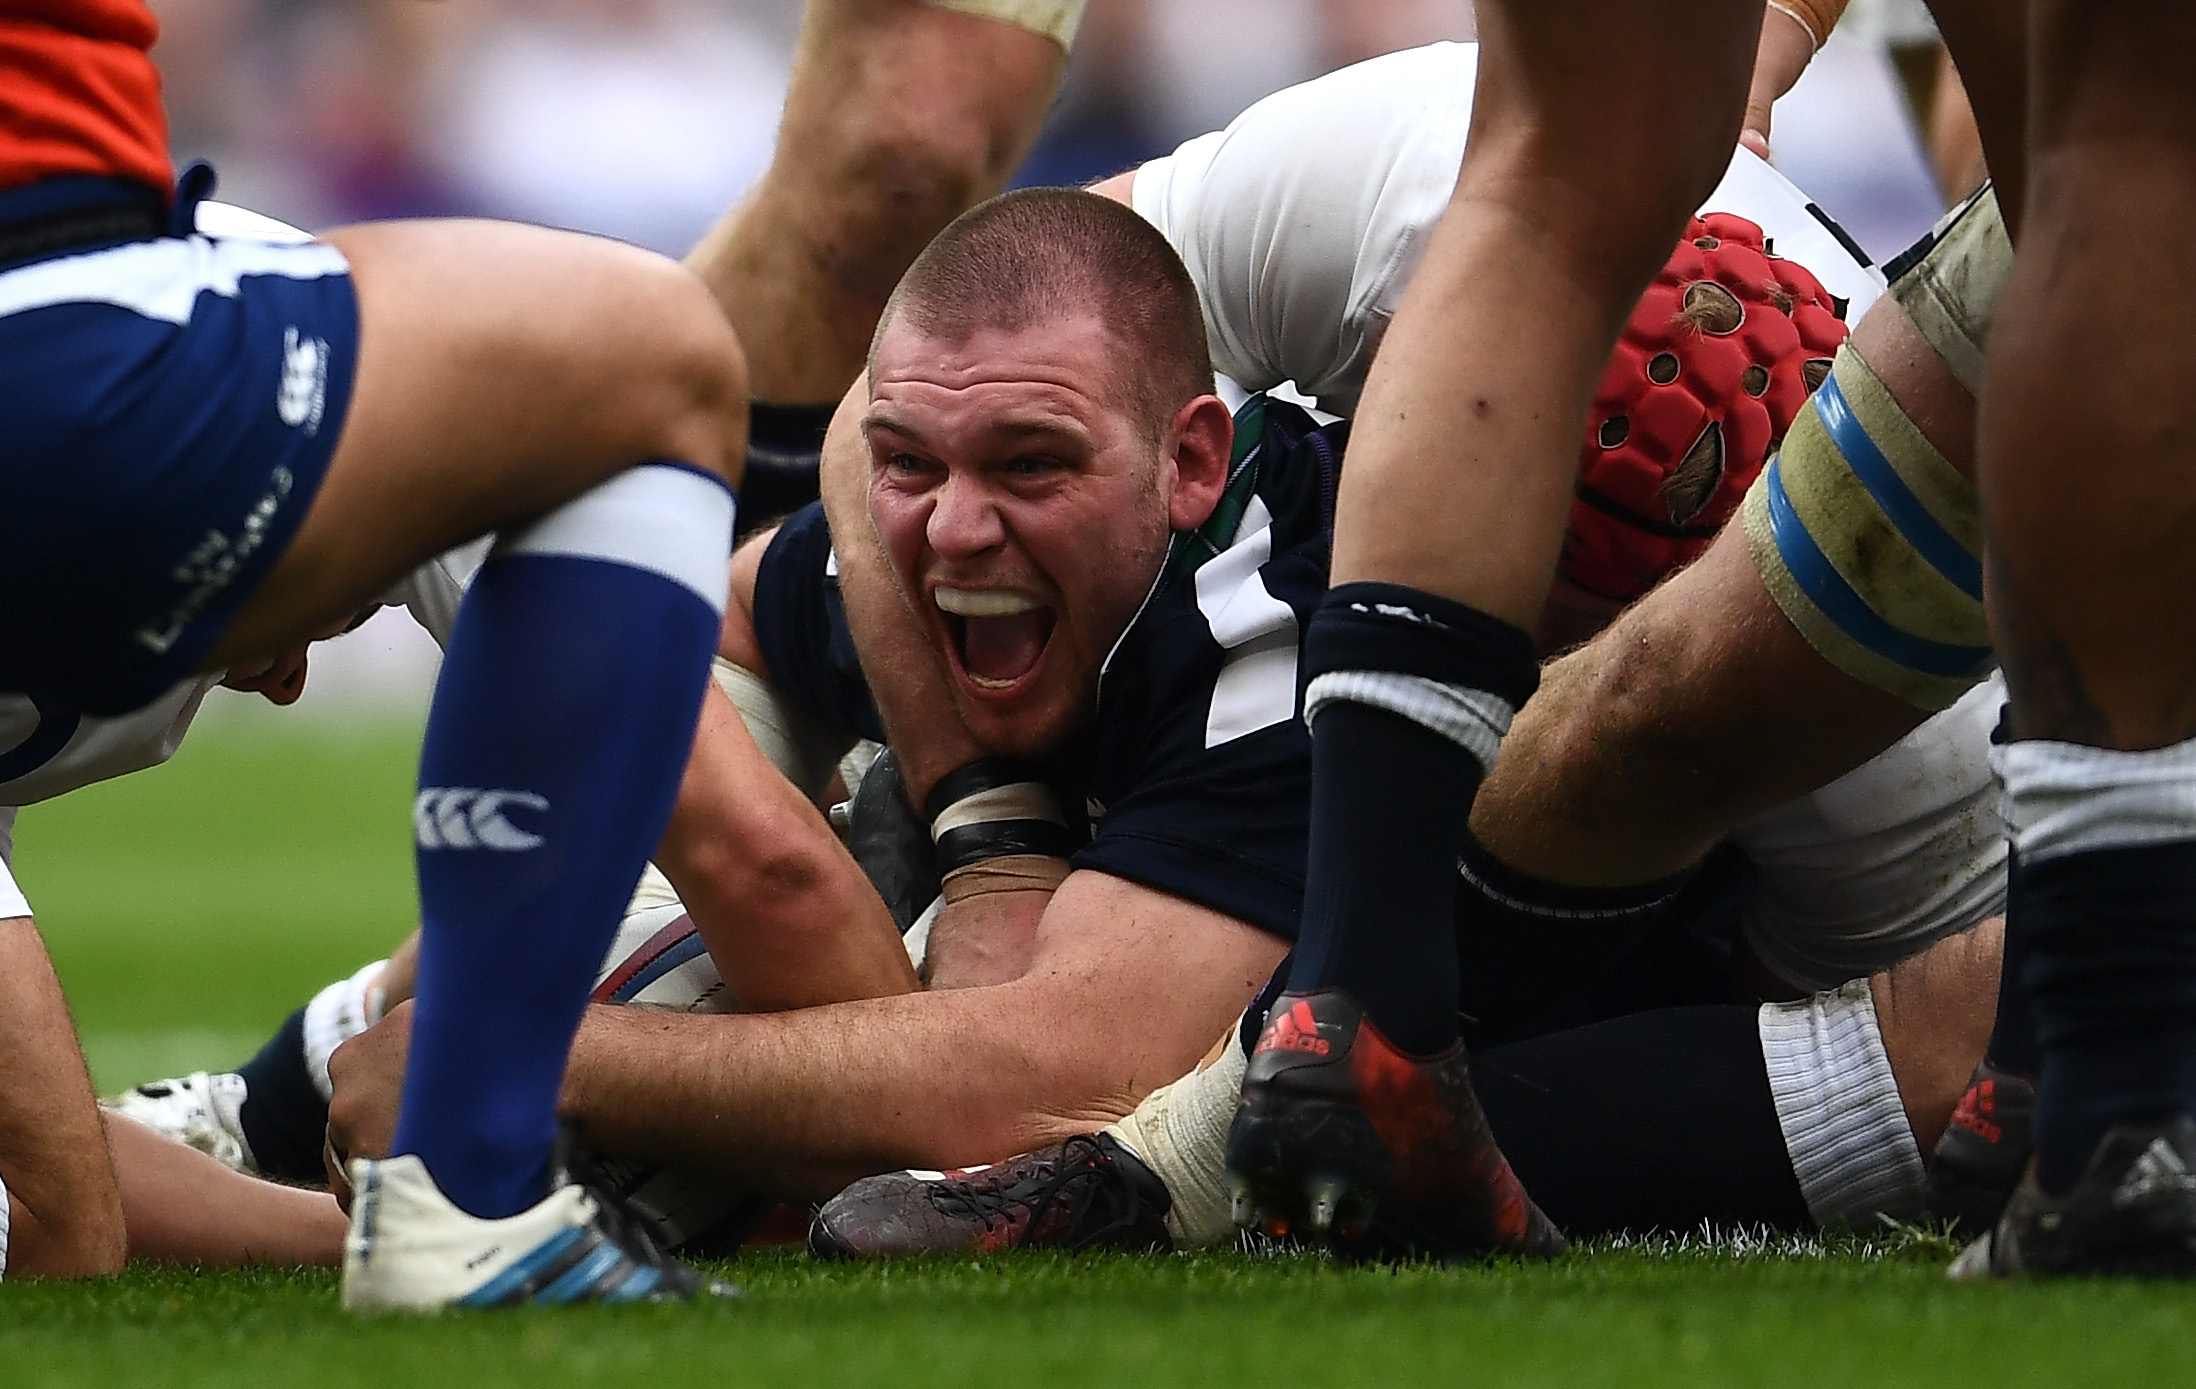 Gordon Reid's maiden try for Scotland was a brief respite from the one way traffic at Twickenham.